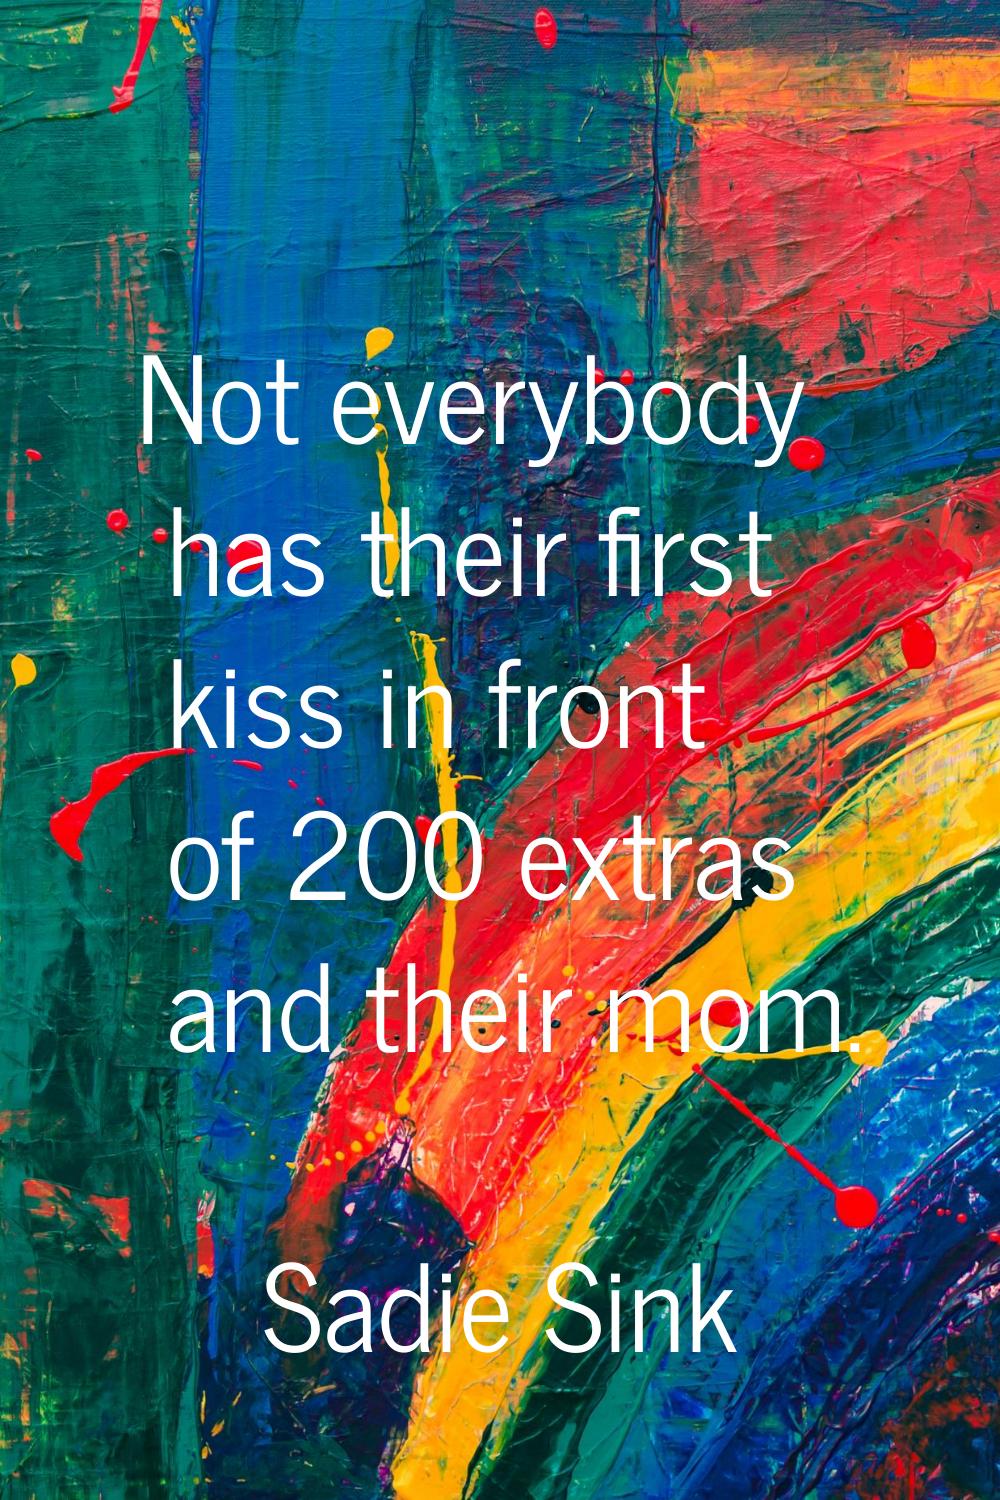 Not everybody has their first kiss in front of 200 extras and their mom.